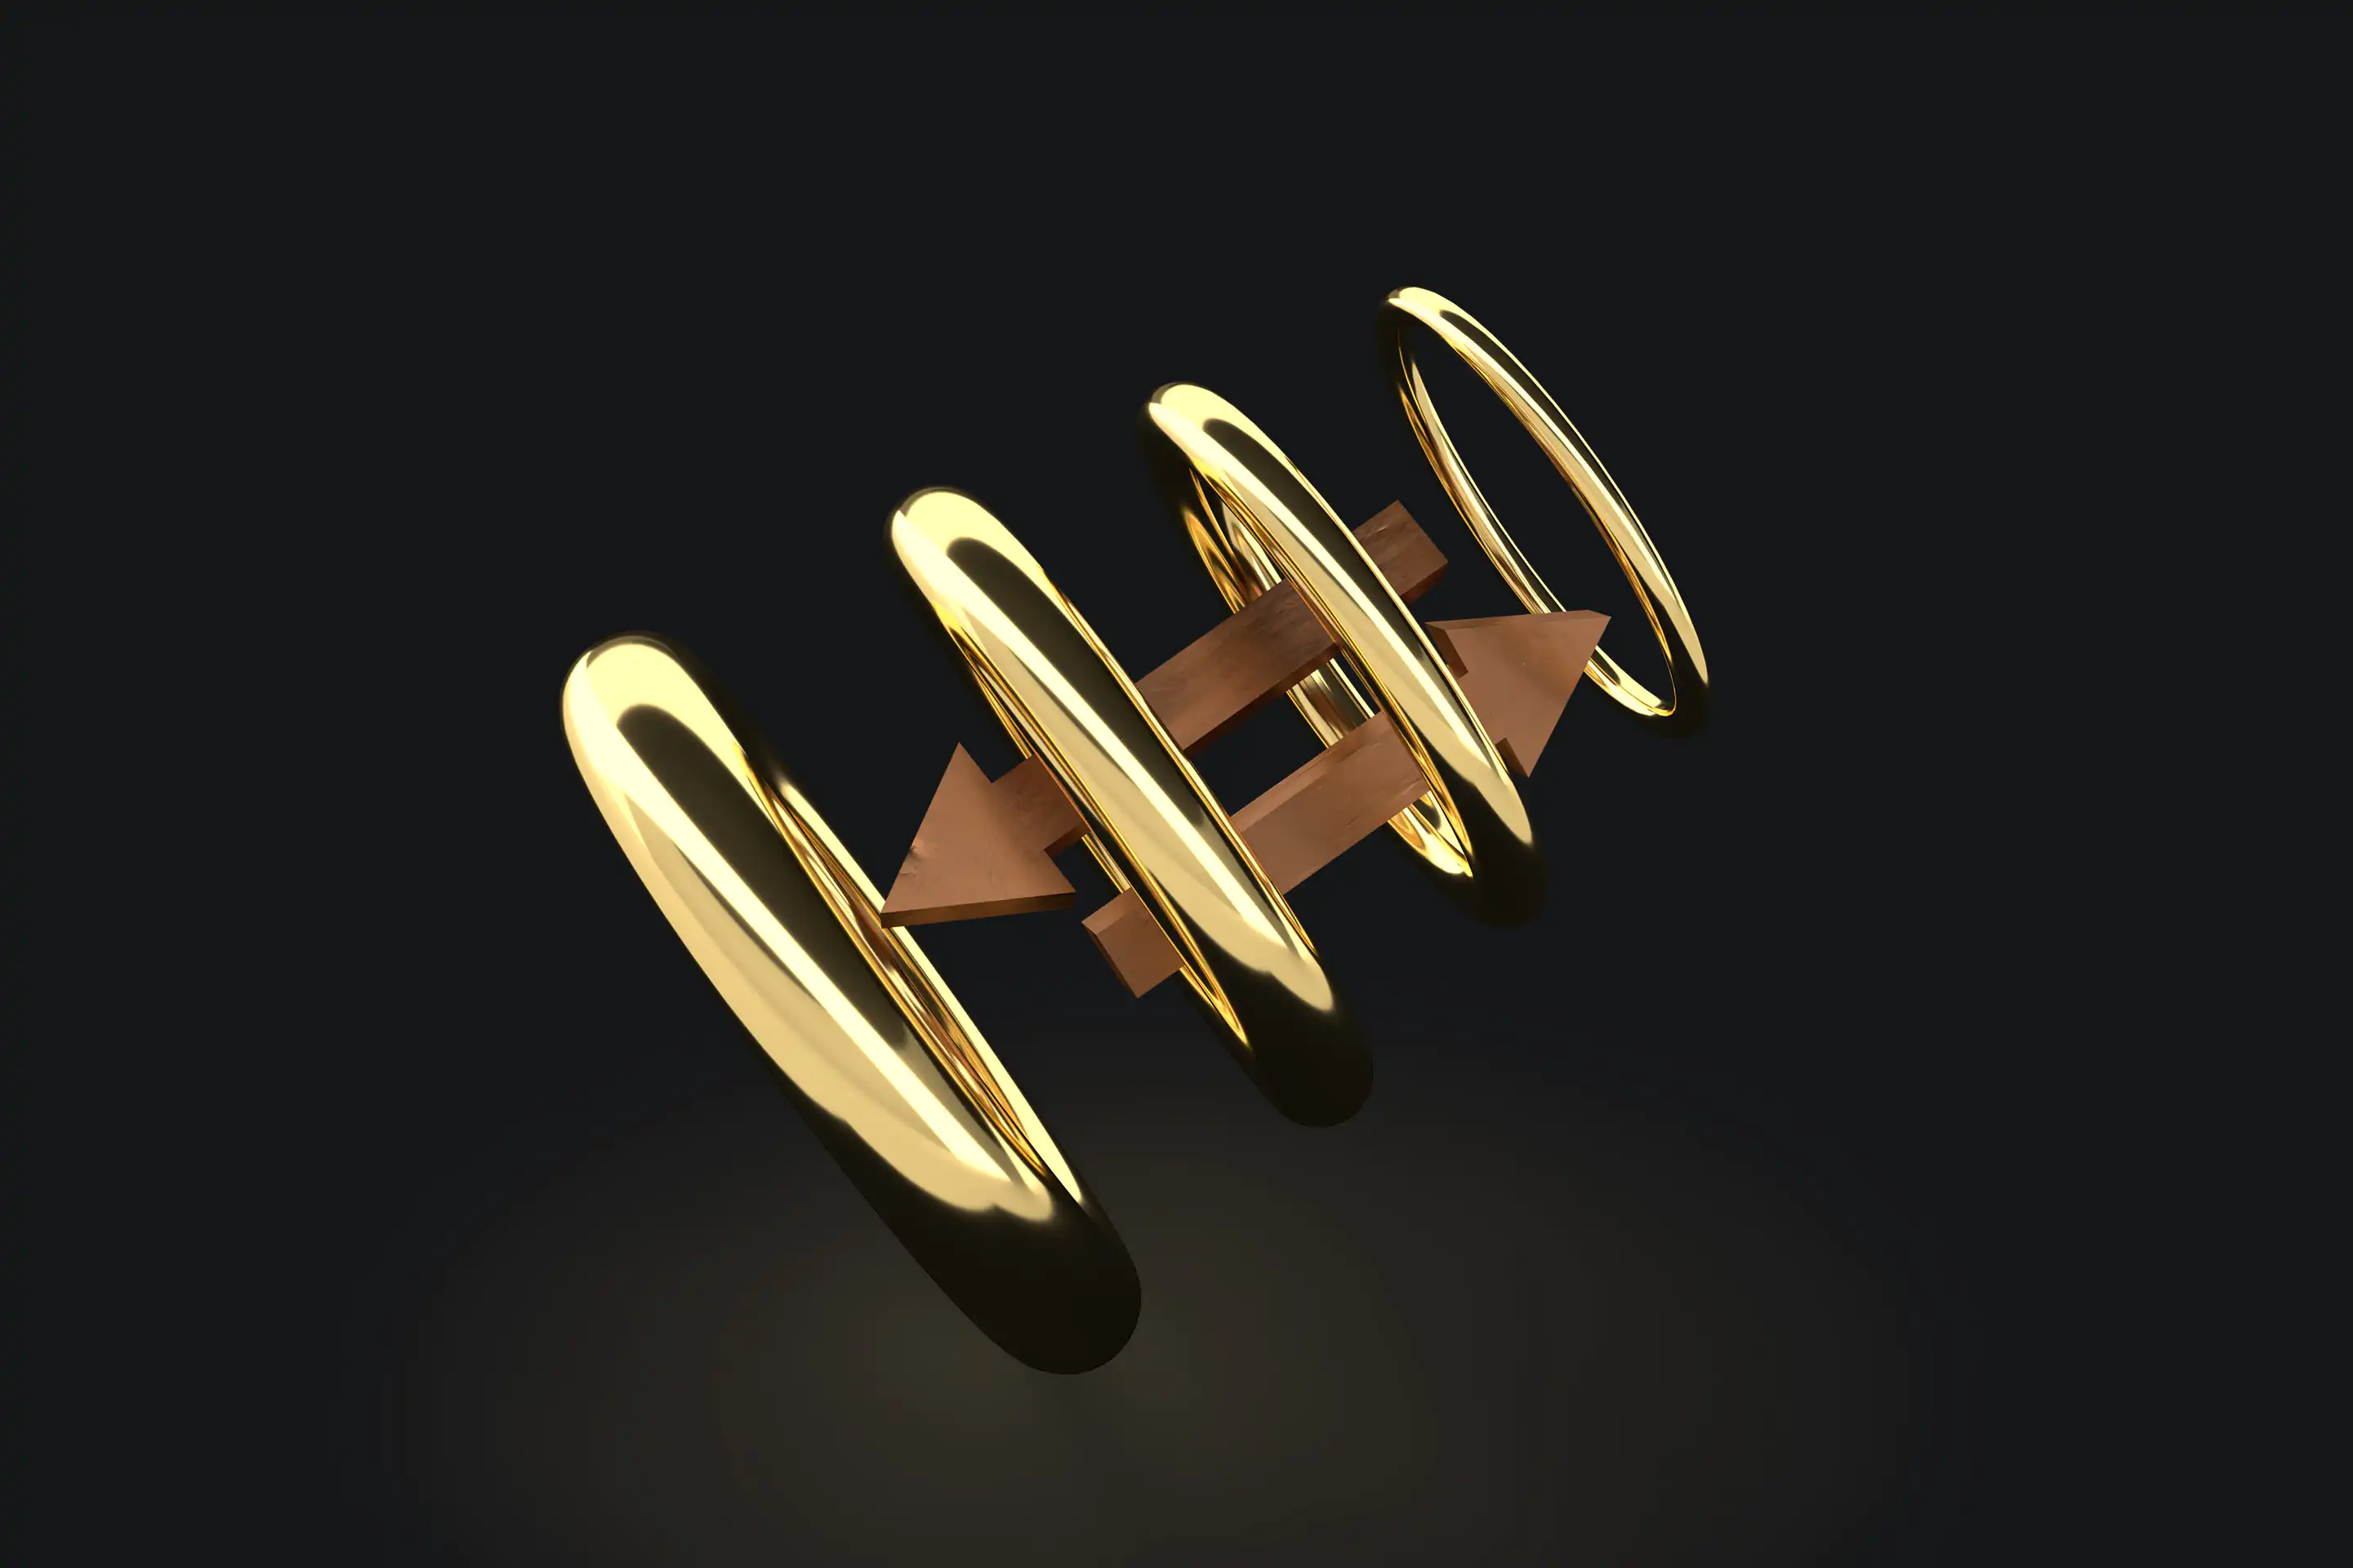 In this golden digital sculpture arrows pass each other inside rings as a sign of transferring data between client and server